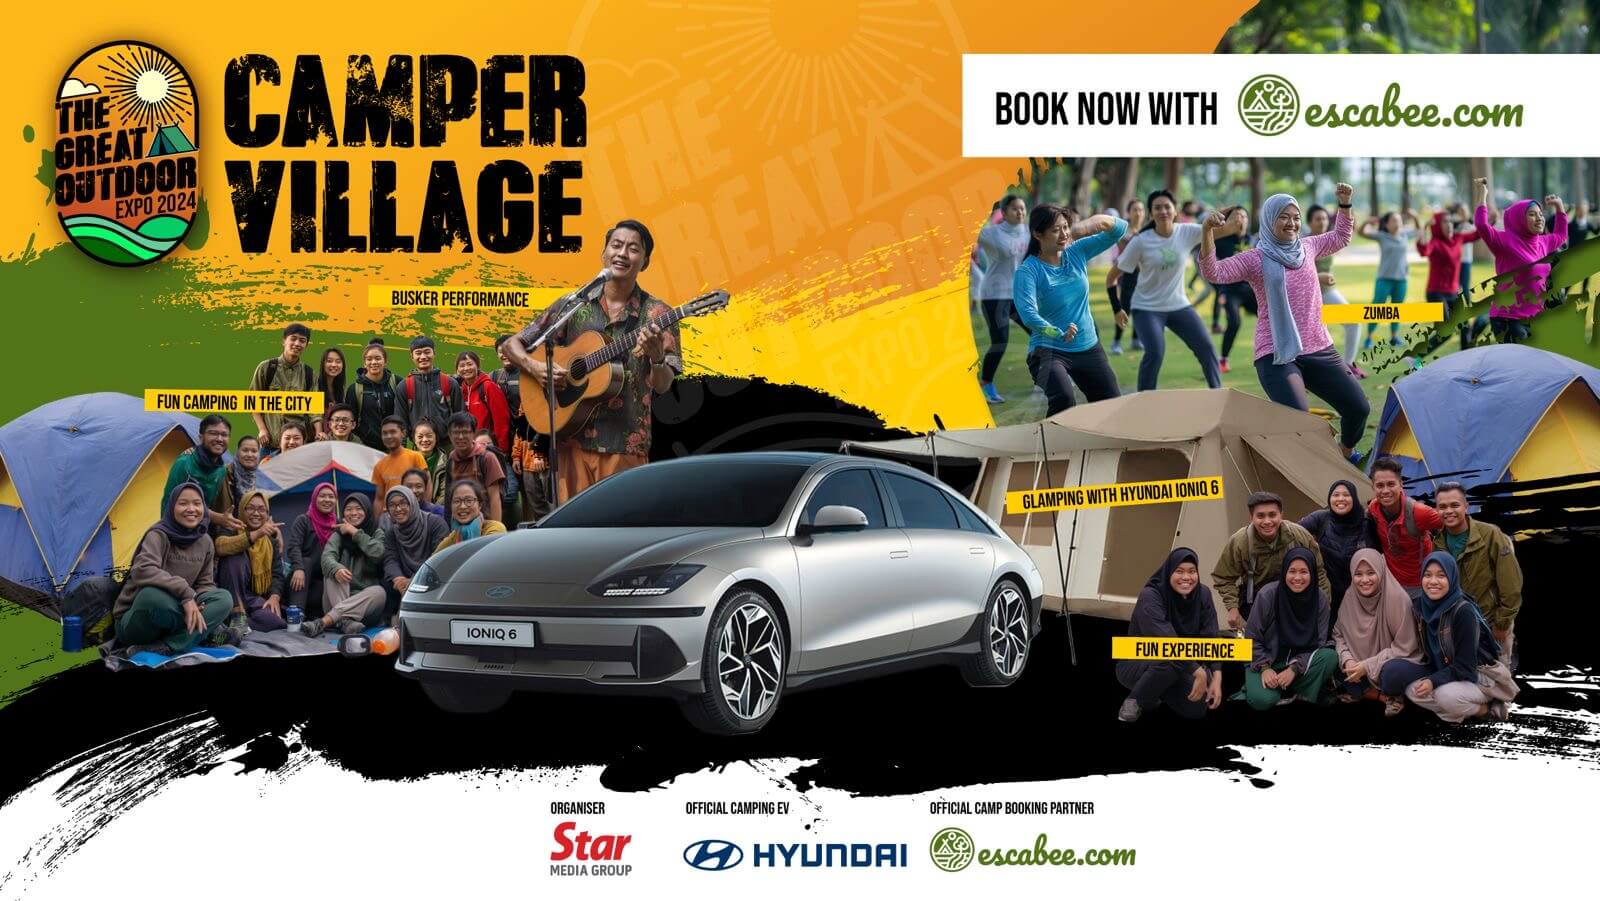 Get ready to embark on an urban camping escapade like no other at The Great Outdoor Expo 2024, happening from May 31st to June 2nd. One of the most anticipated highlights of this year's event is Camper Village, offering a unique opportunity for city dwellers to experience the great outdoors without leaving the comfort of the city.

For those looking for a touch of luxury, Camper Village offers three distinct camping packages. The Hyundai Glamping Camps, limited to just 10 spots, provide a luxurious camping experience powered by Hyundai IONIQ 5 and IONIQ 6. These camps feature standard 3-pin plugs, ensuring a seamless camping experience without compromising on comfort. The vehicles also boast the innovative Vehicle-to-Load (V2L) feature, capable of delivering up to 3.6 kW to external devices through a standard three-prong wall outlet. Additionally, Hyundai's Electric-Global Modular Platform (E-GMP) ensures superior stability when towing trailers and caravans, providing peace of mind for those looking to explore the great outdoors with their vehicles.

Camper Village is set to offer a plethora of activities catering to all interests. In the mornings, guests can kick-start their day with invigorating group exercises, lively Zumba sessions, and engaging outdoor sports. As the day unfolds, the village transforms into a hub of excitement with indoor adventures such as wall climbing, abseiling, flying fox, and archery tag. For those seeking a more relaxed experience, there will also be a charming petting zoo, kids' coloring contests, and an intriguing treasure hunt.

As the sun sets, Camper Village comes alive with the enchanting melodies of busker performances, a bustling night market offering a variety of delights, and the inviting glow of campfires. The ambiance is set to be truly magical, promising unforgettable evenings under the stars.